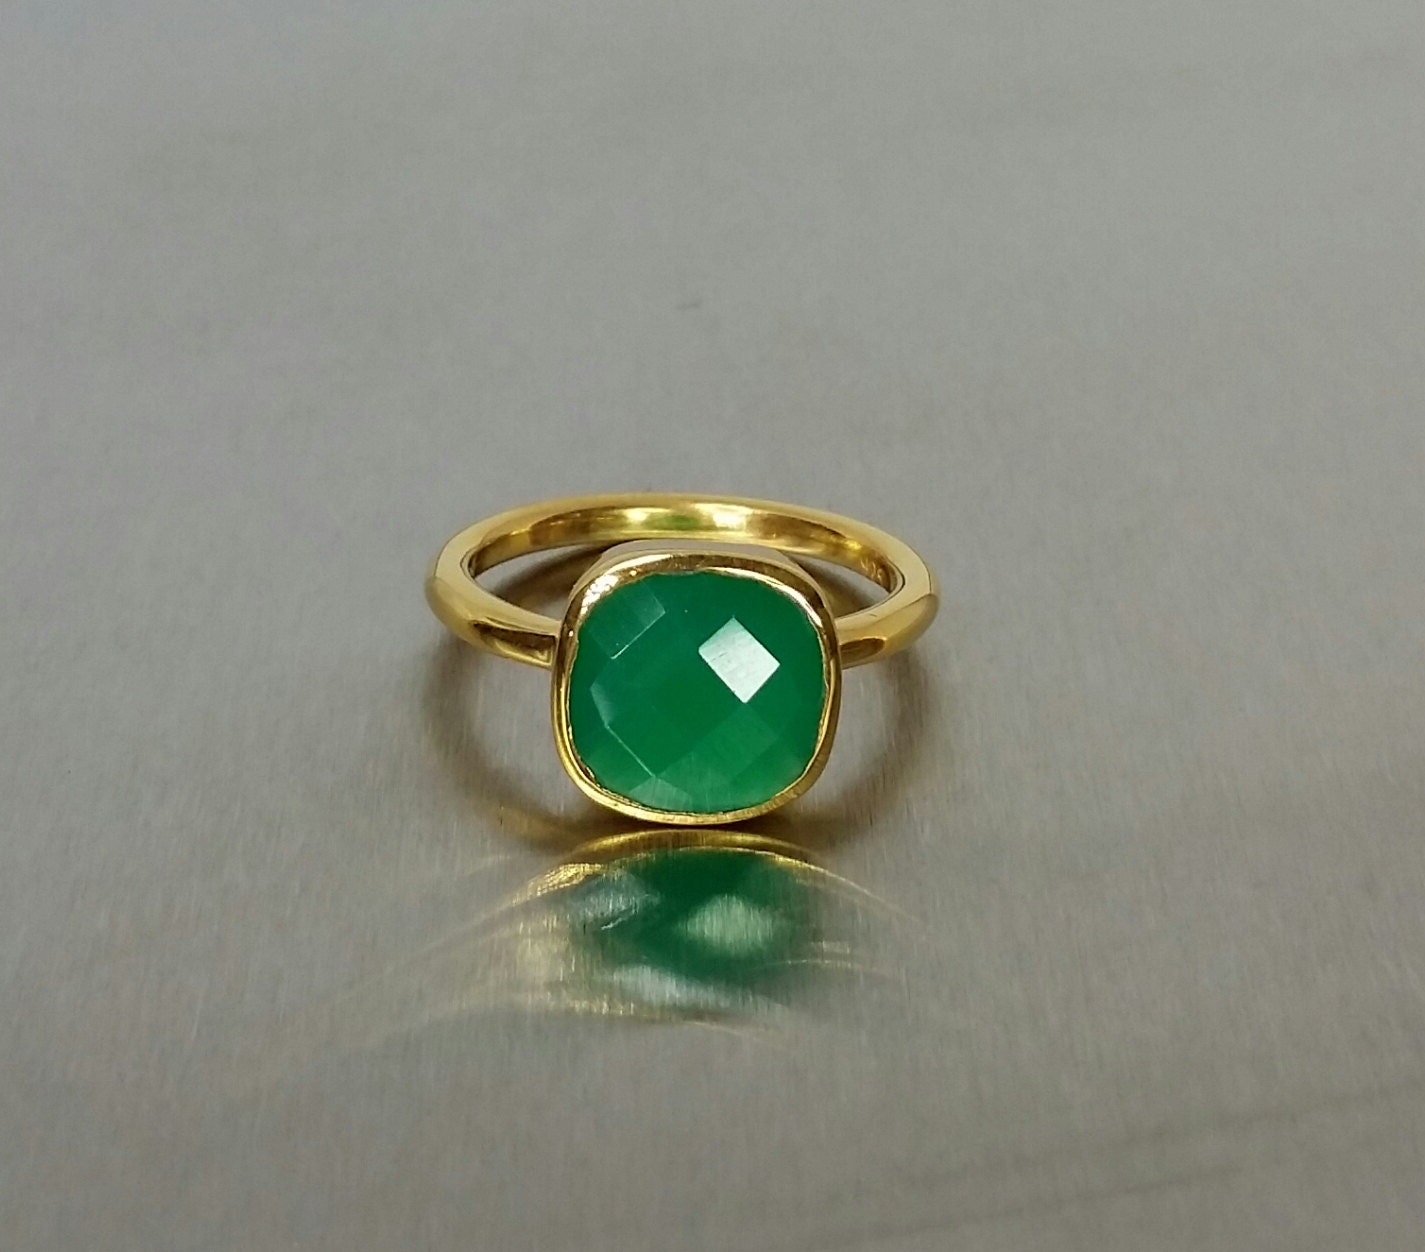 green onyx ring meaning